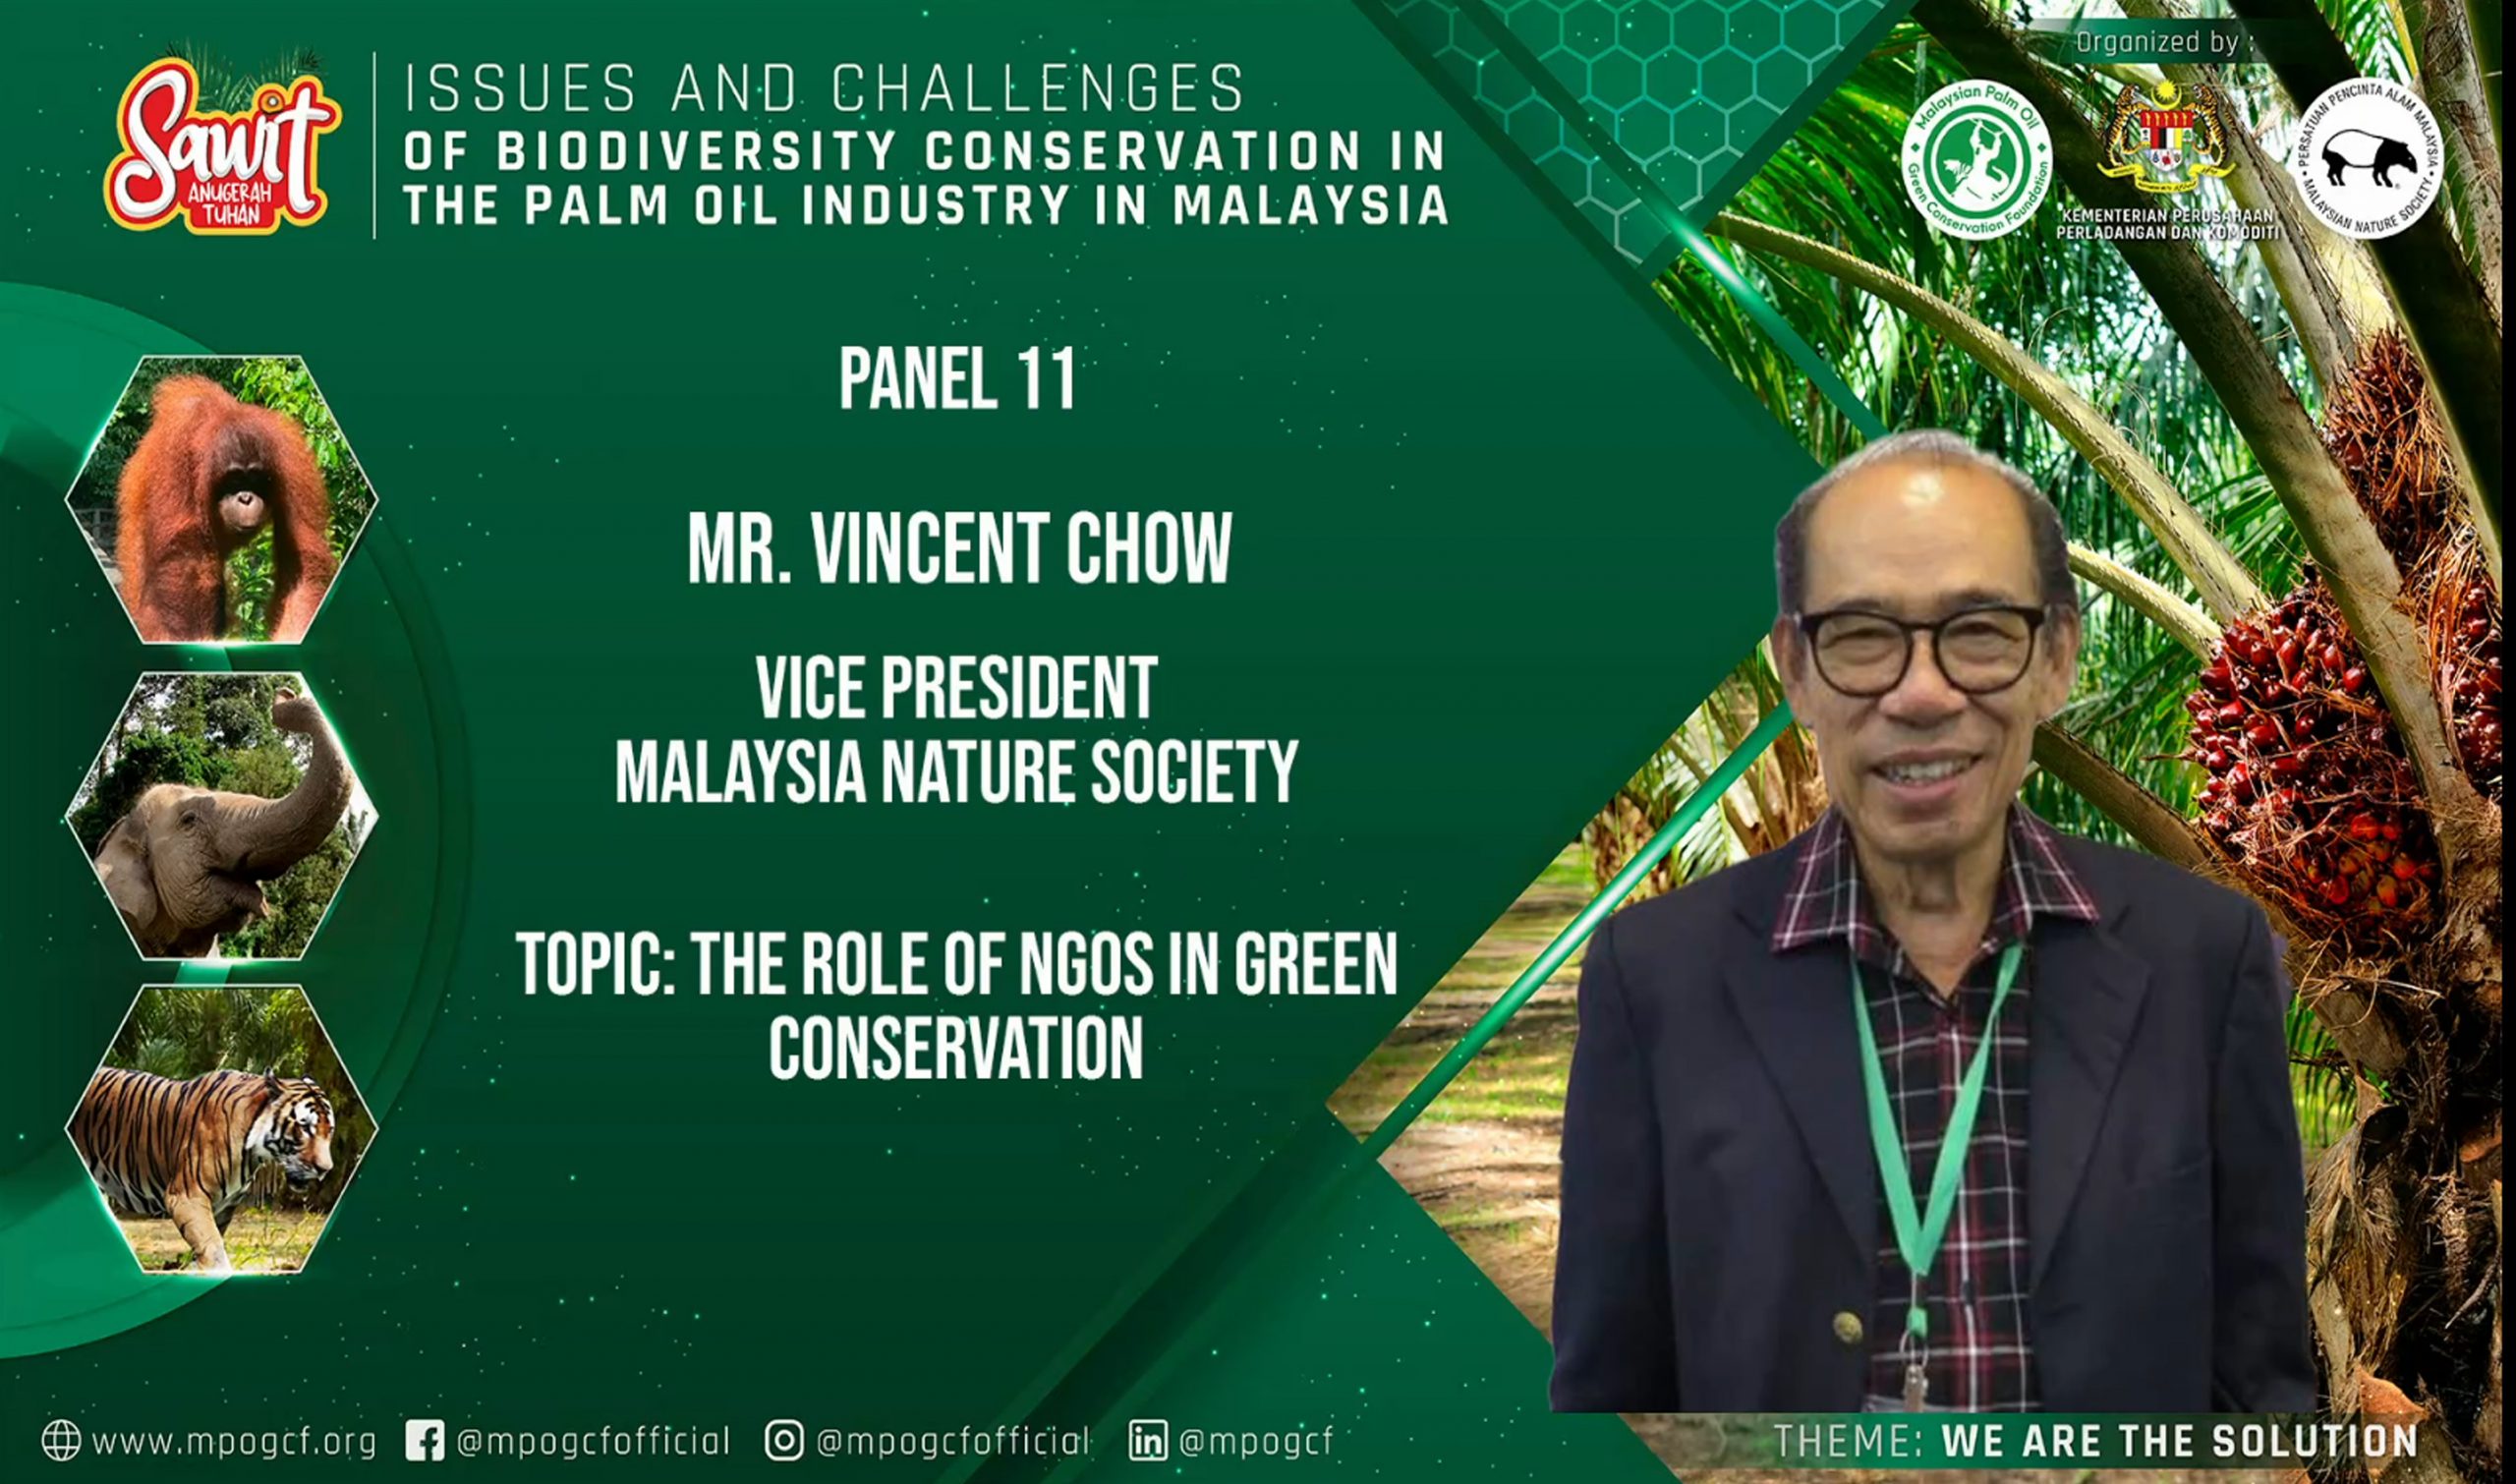 The Role of NGOs in Green Conservation by Mr Vincent Chow